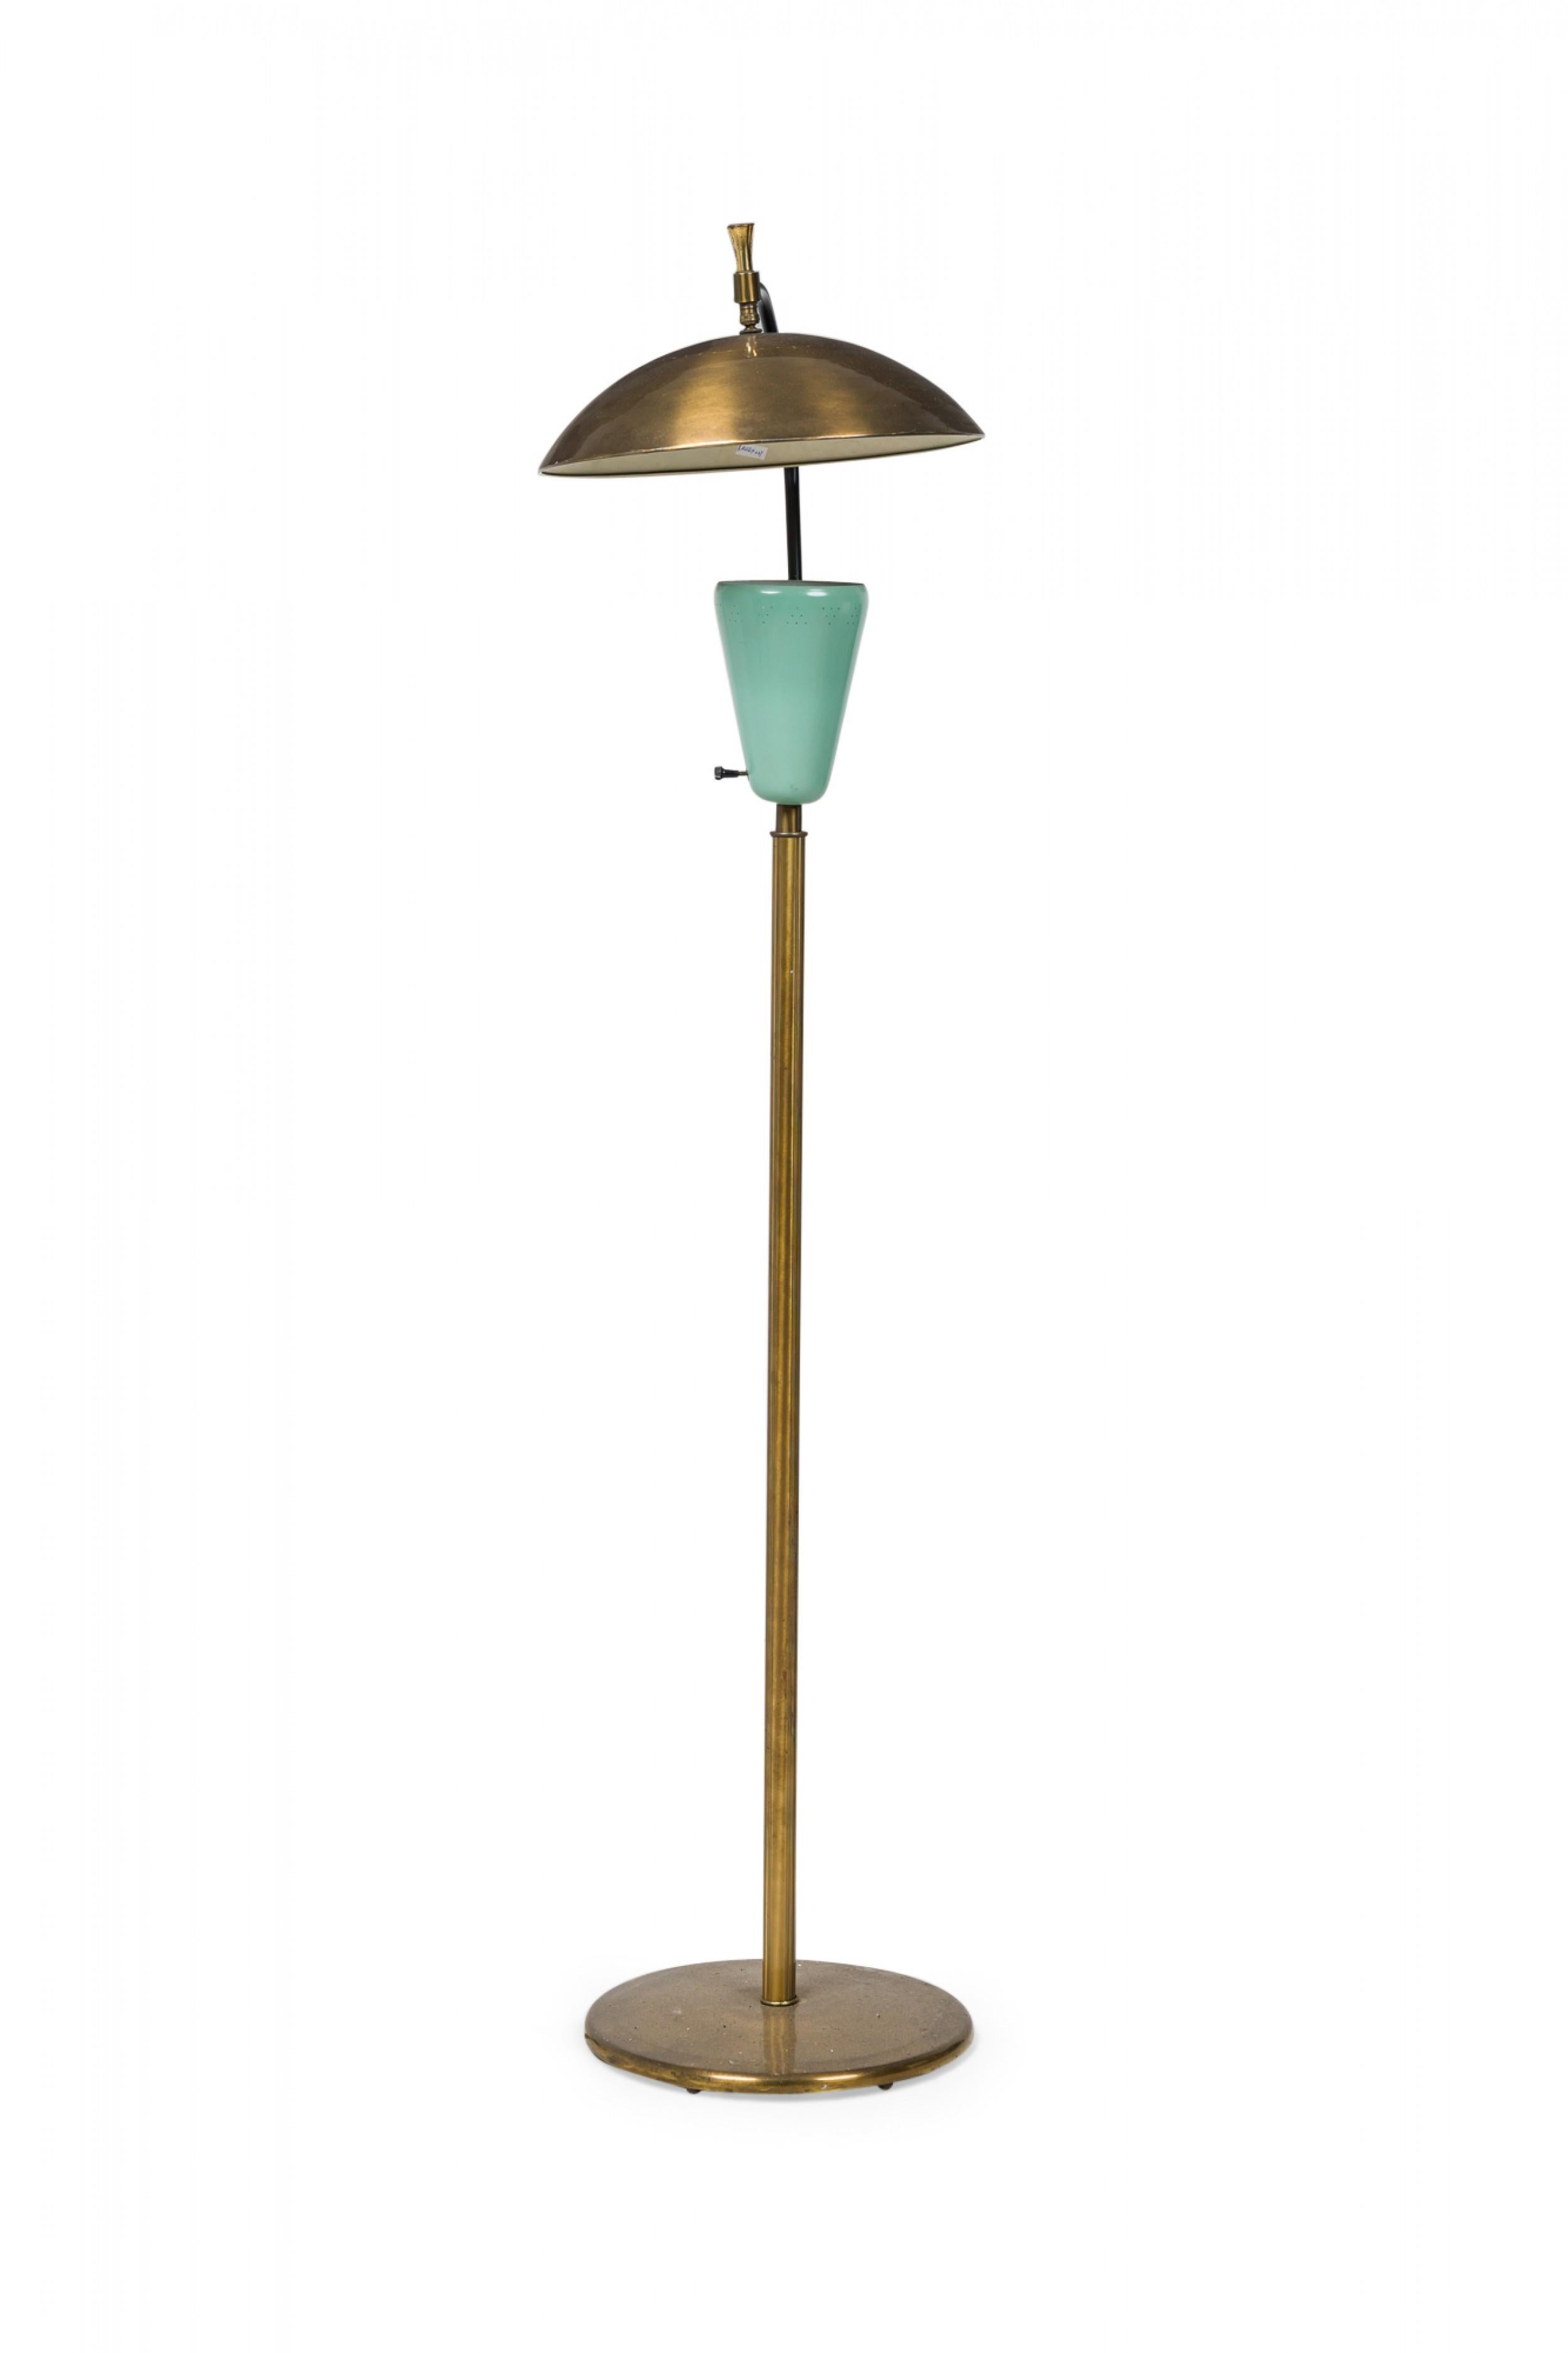 midcentury French (1950s) brass floor lamp with a torchere fixture encased in a conical mint green enameled metal shade, and topped with a hanging brass dome. (Pierre Guariche).